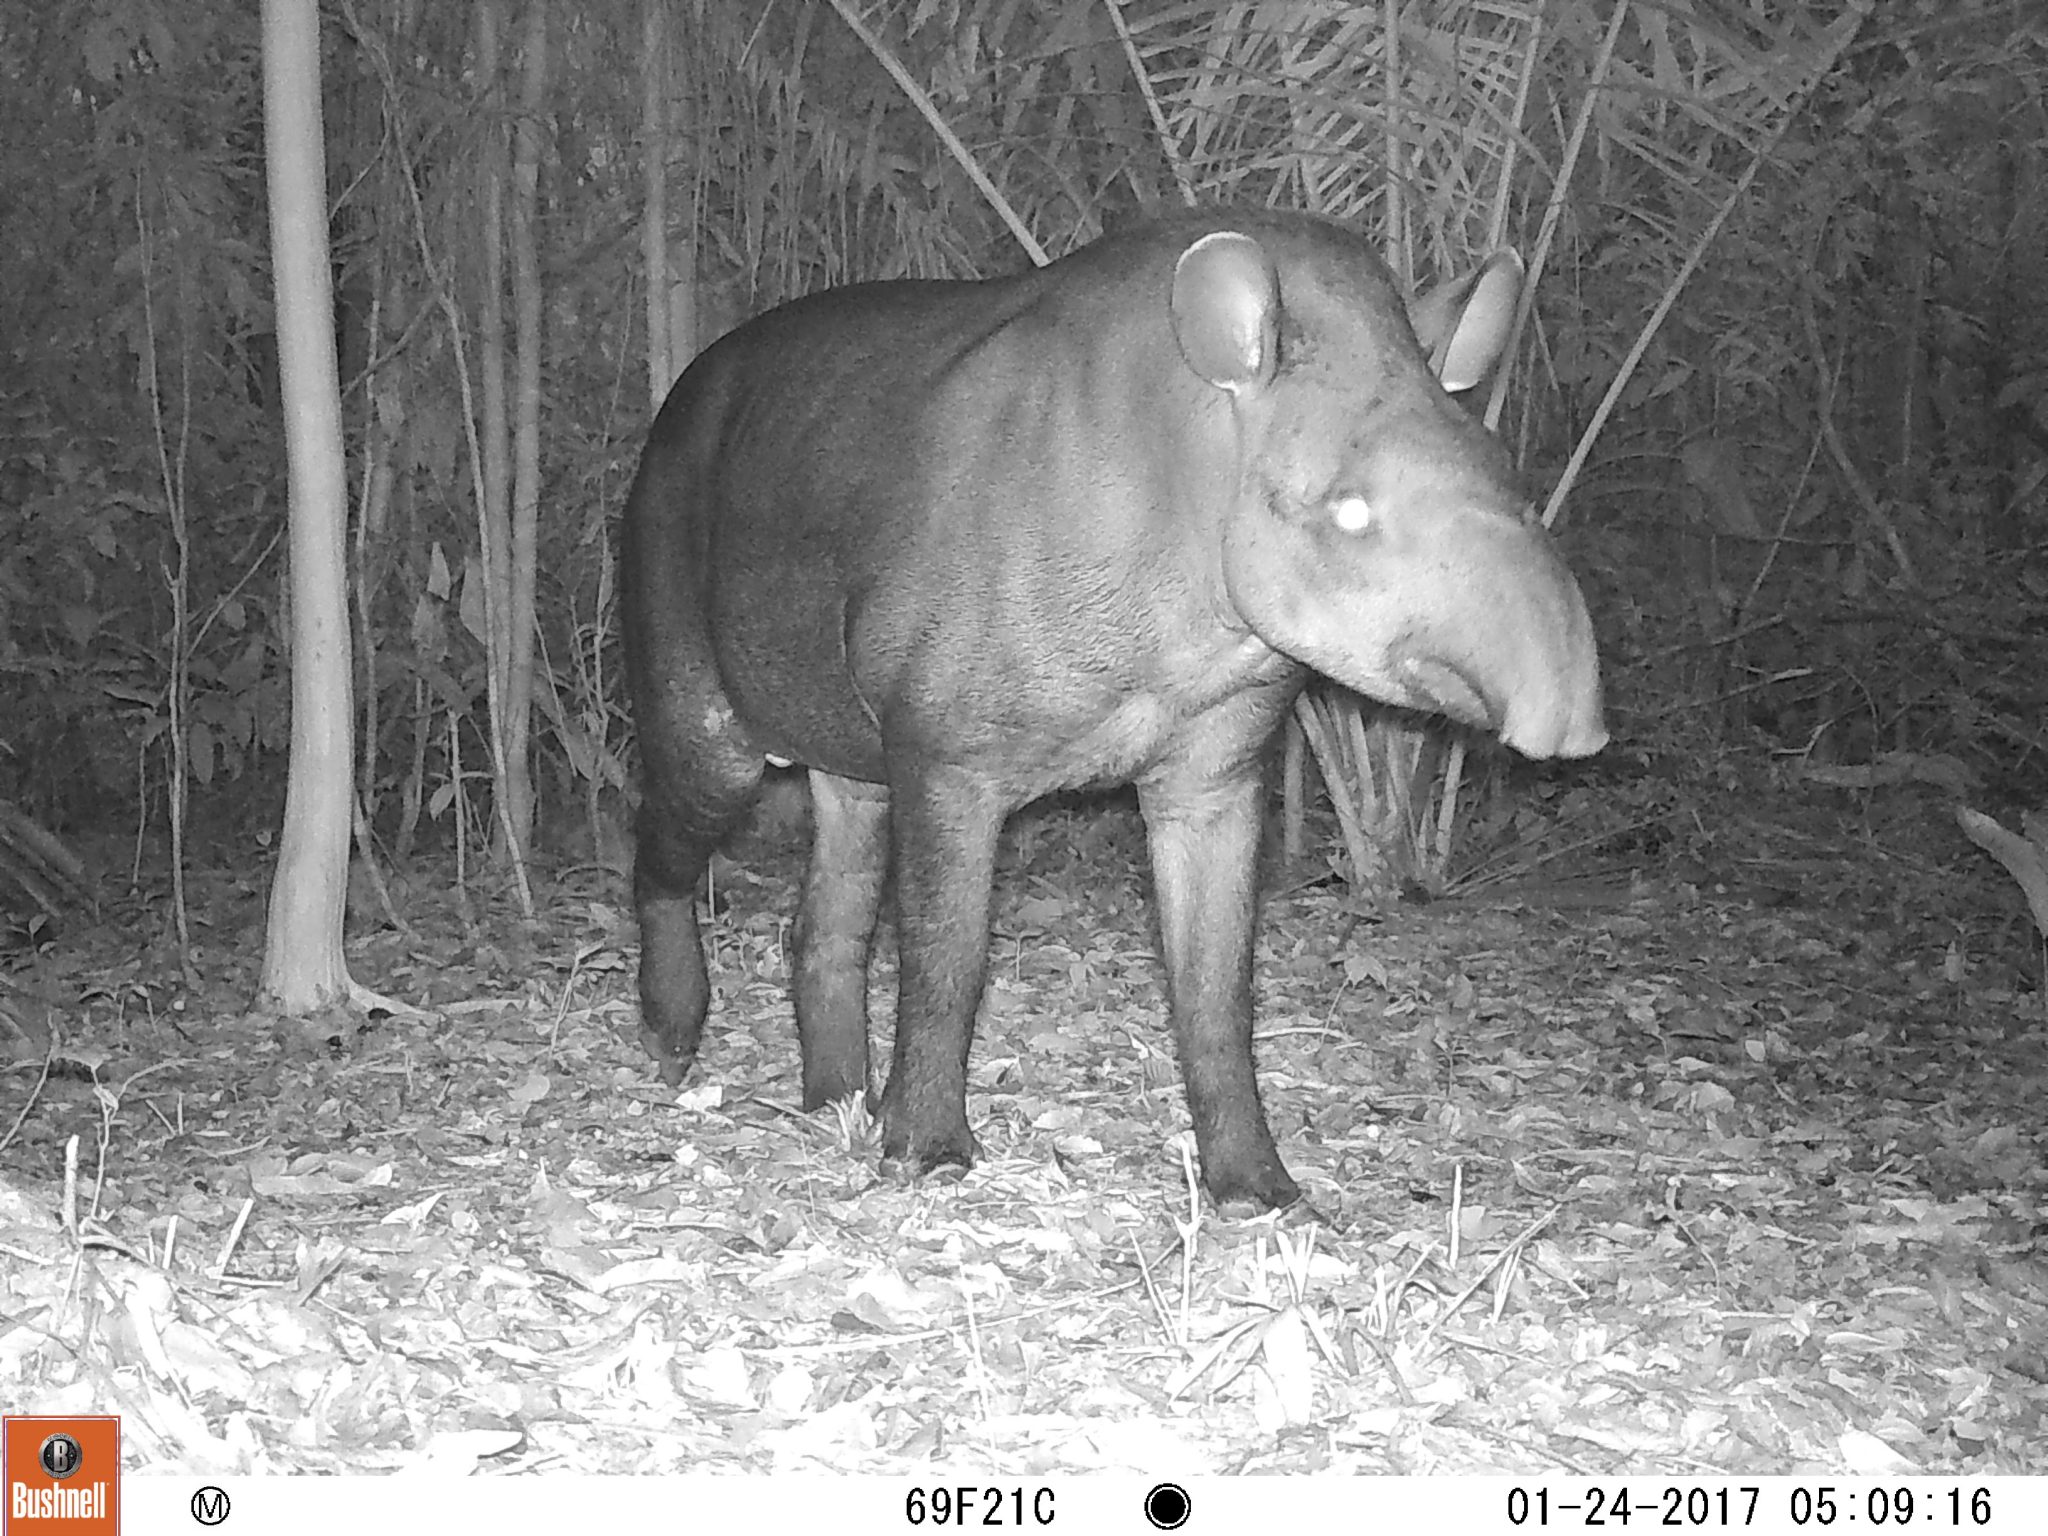 Our tapir study reported by Duke University